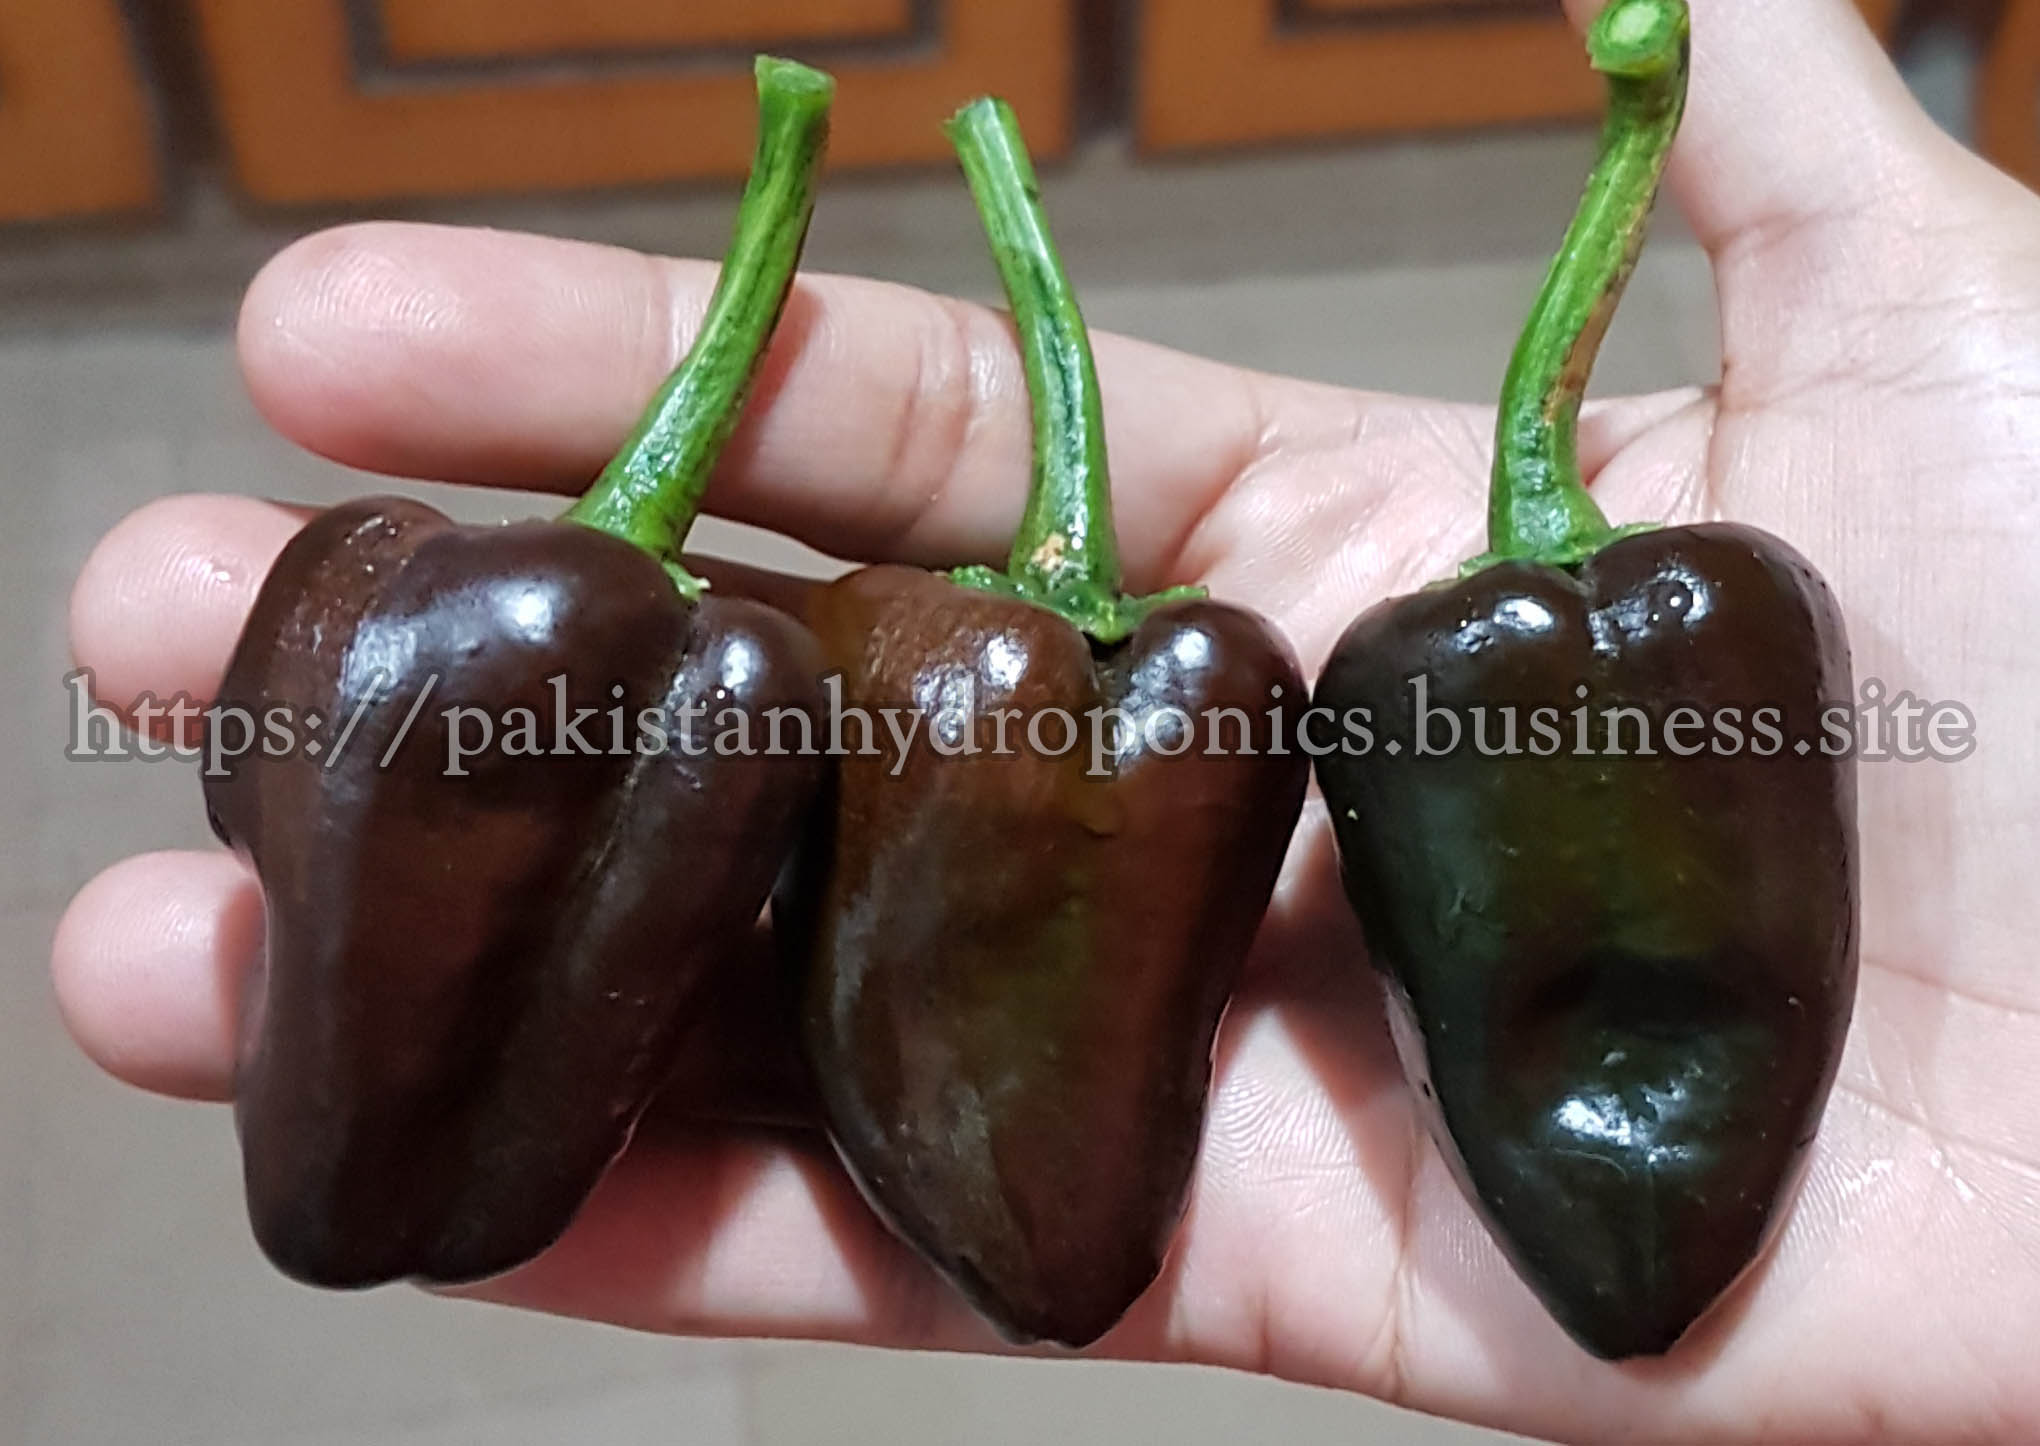 Hydroponic-Sweet-Brown-Peppers-Growing-in-Pakistan-Hydroponics-Greenhouse-Porject